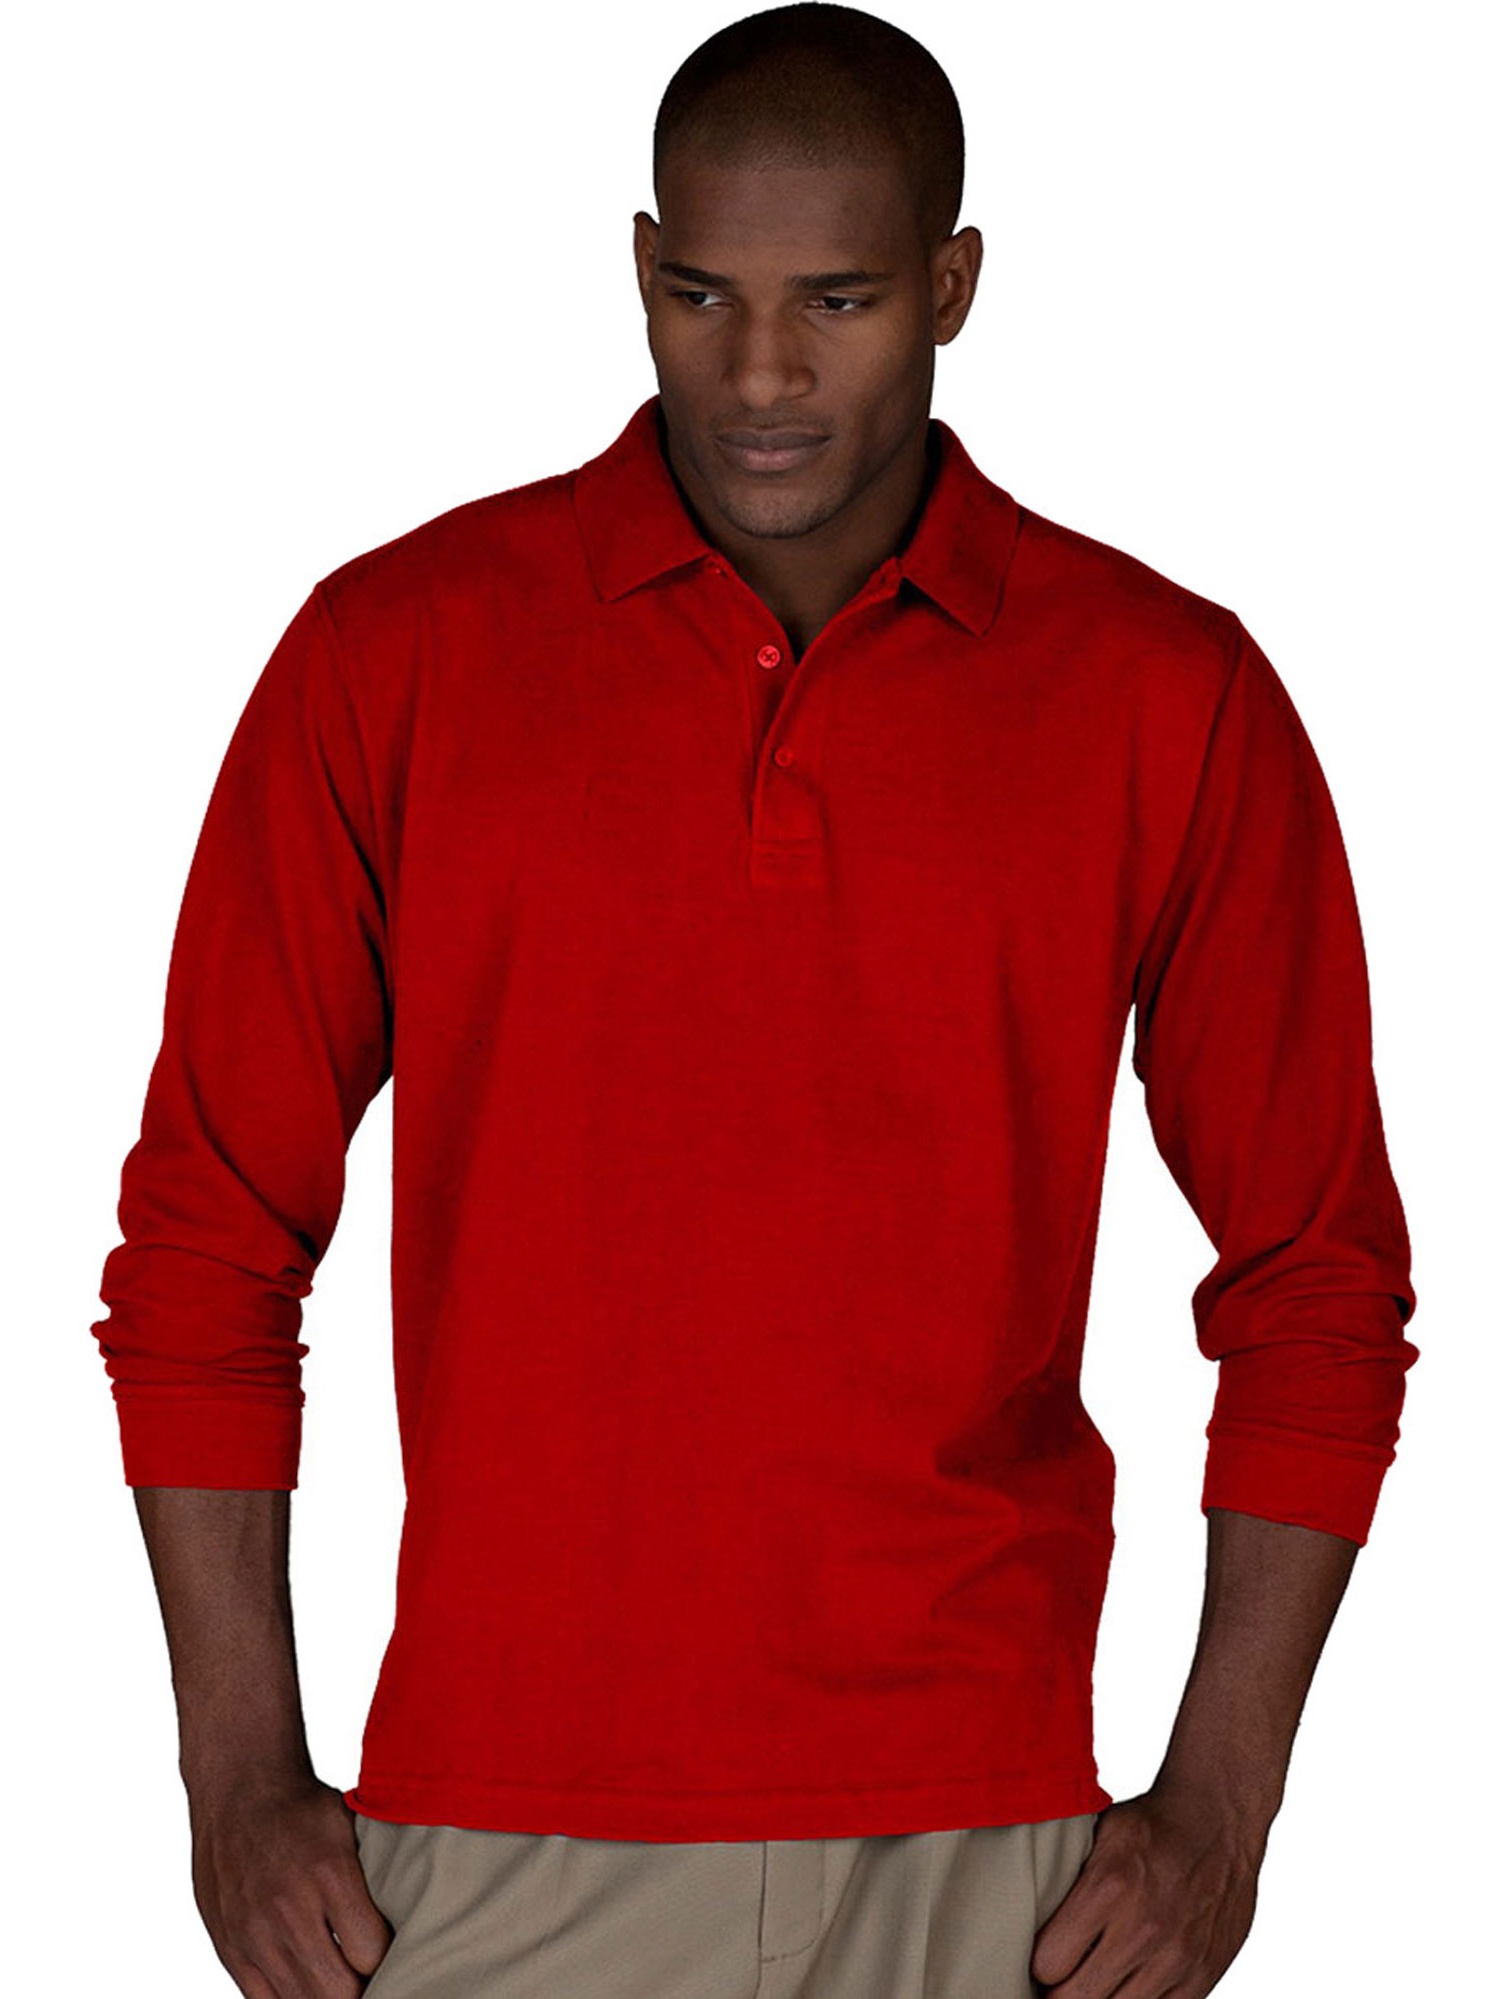 AIYINO Men/'s Big and Tall Short//Long Sleeve Polo Shirt Classic Fit Solid Soft Cotton Shirt